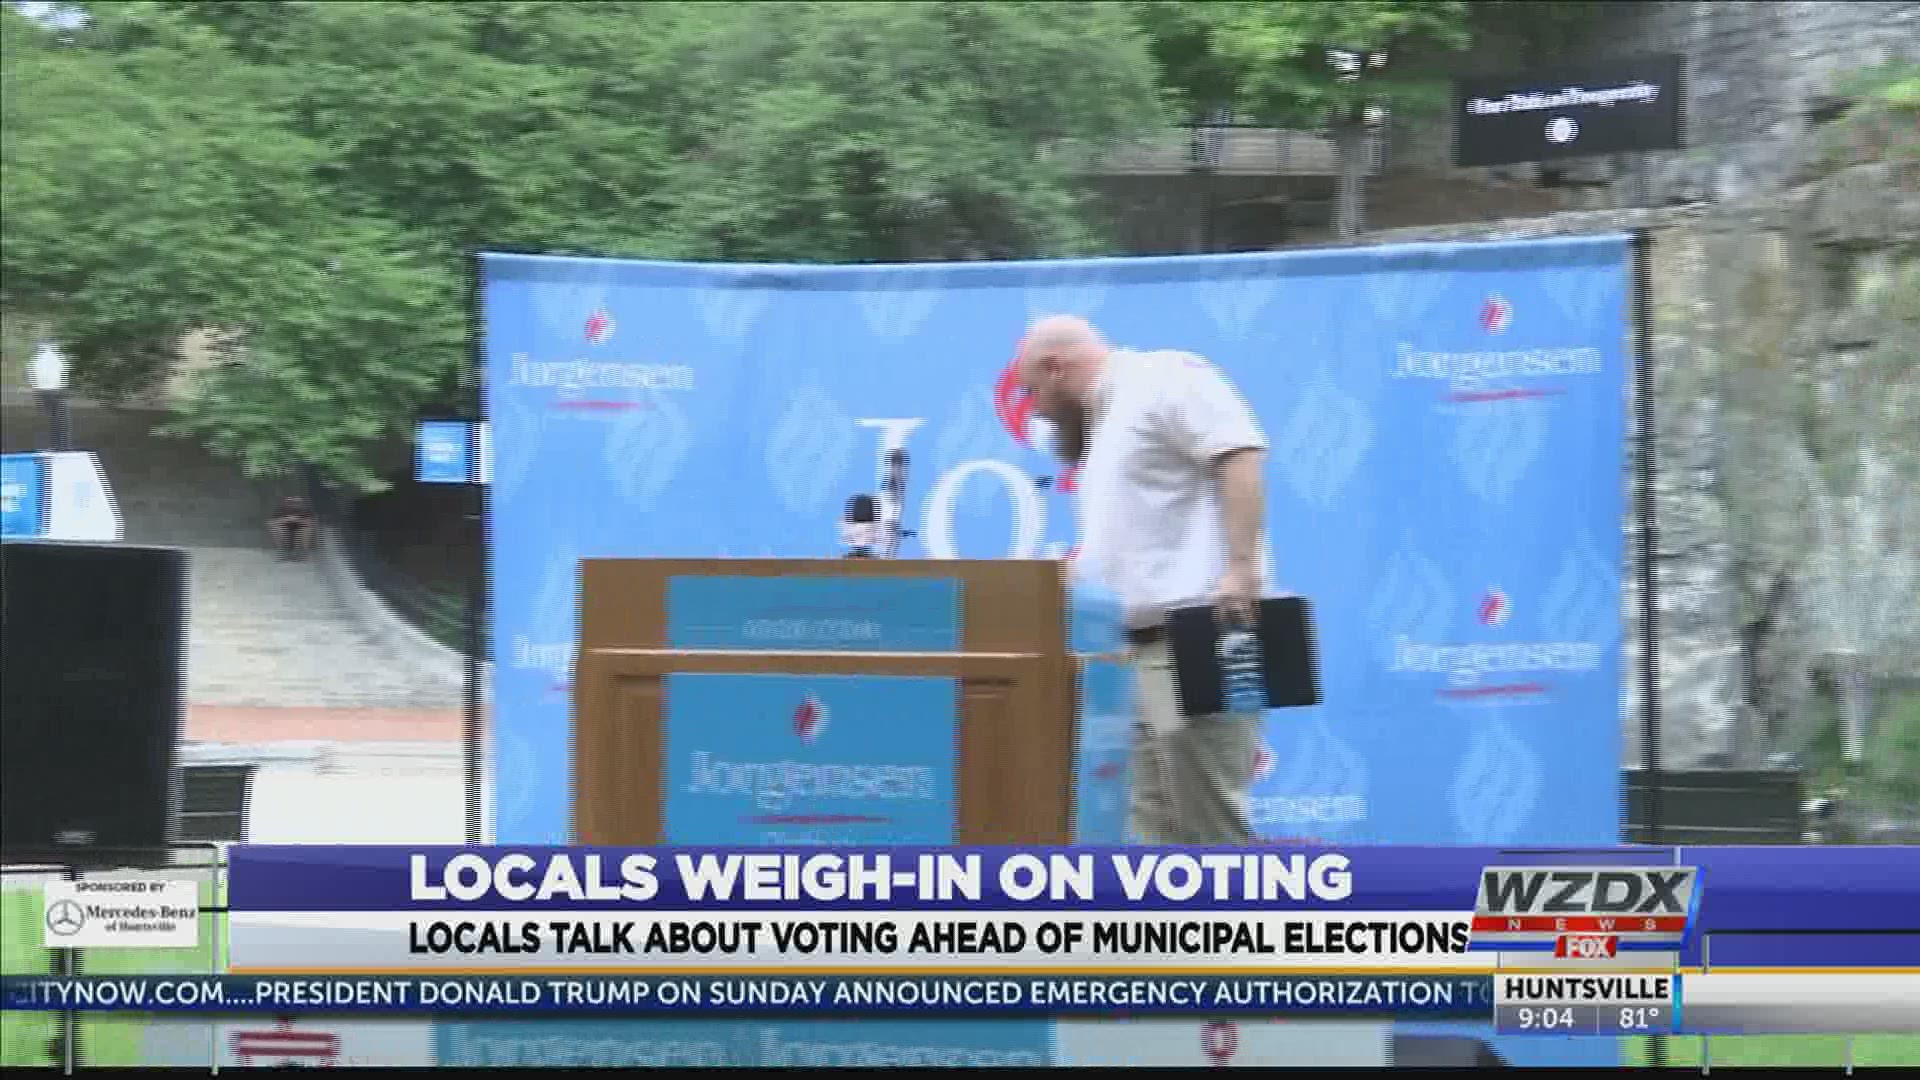 Locals speak on exercising the right to vote ahead of municipal elections on Tuesday August 25th.